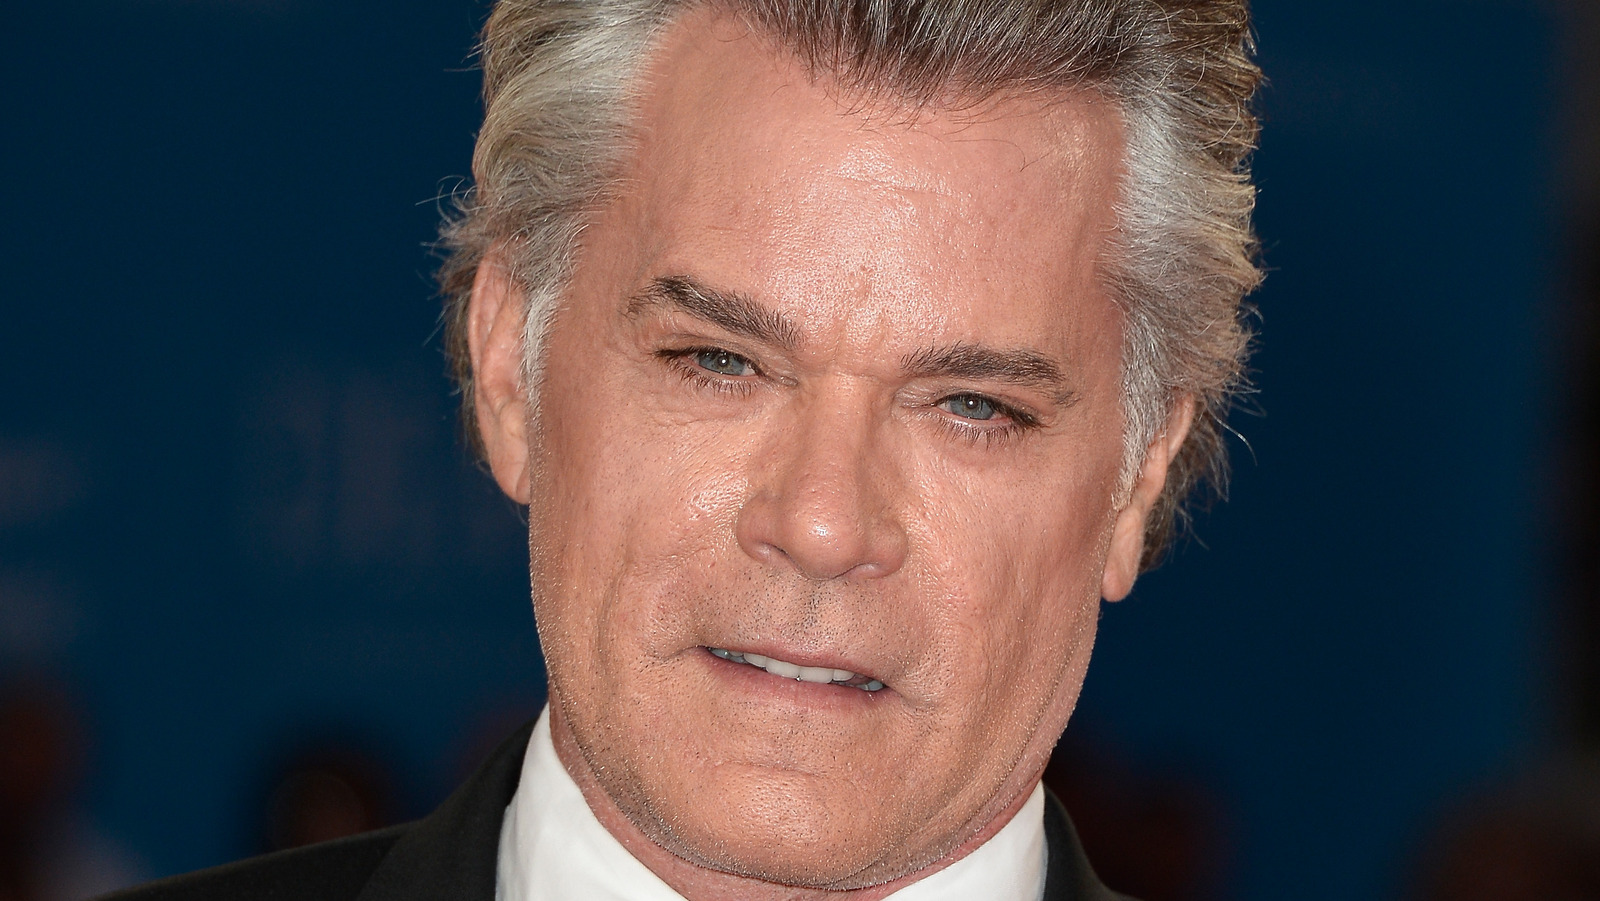 https://www.looper.com/img/gallery/60-most-memorable-ray-liotta-movies-ranked-worst-to-best/l-intro-1653663596.jpg